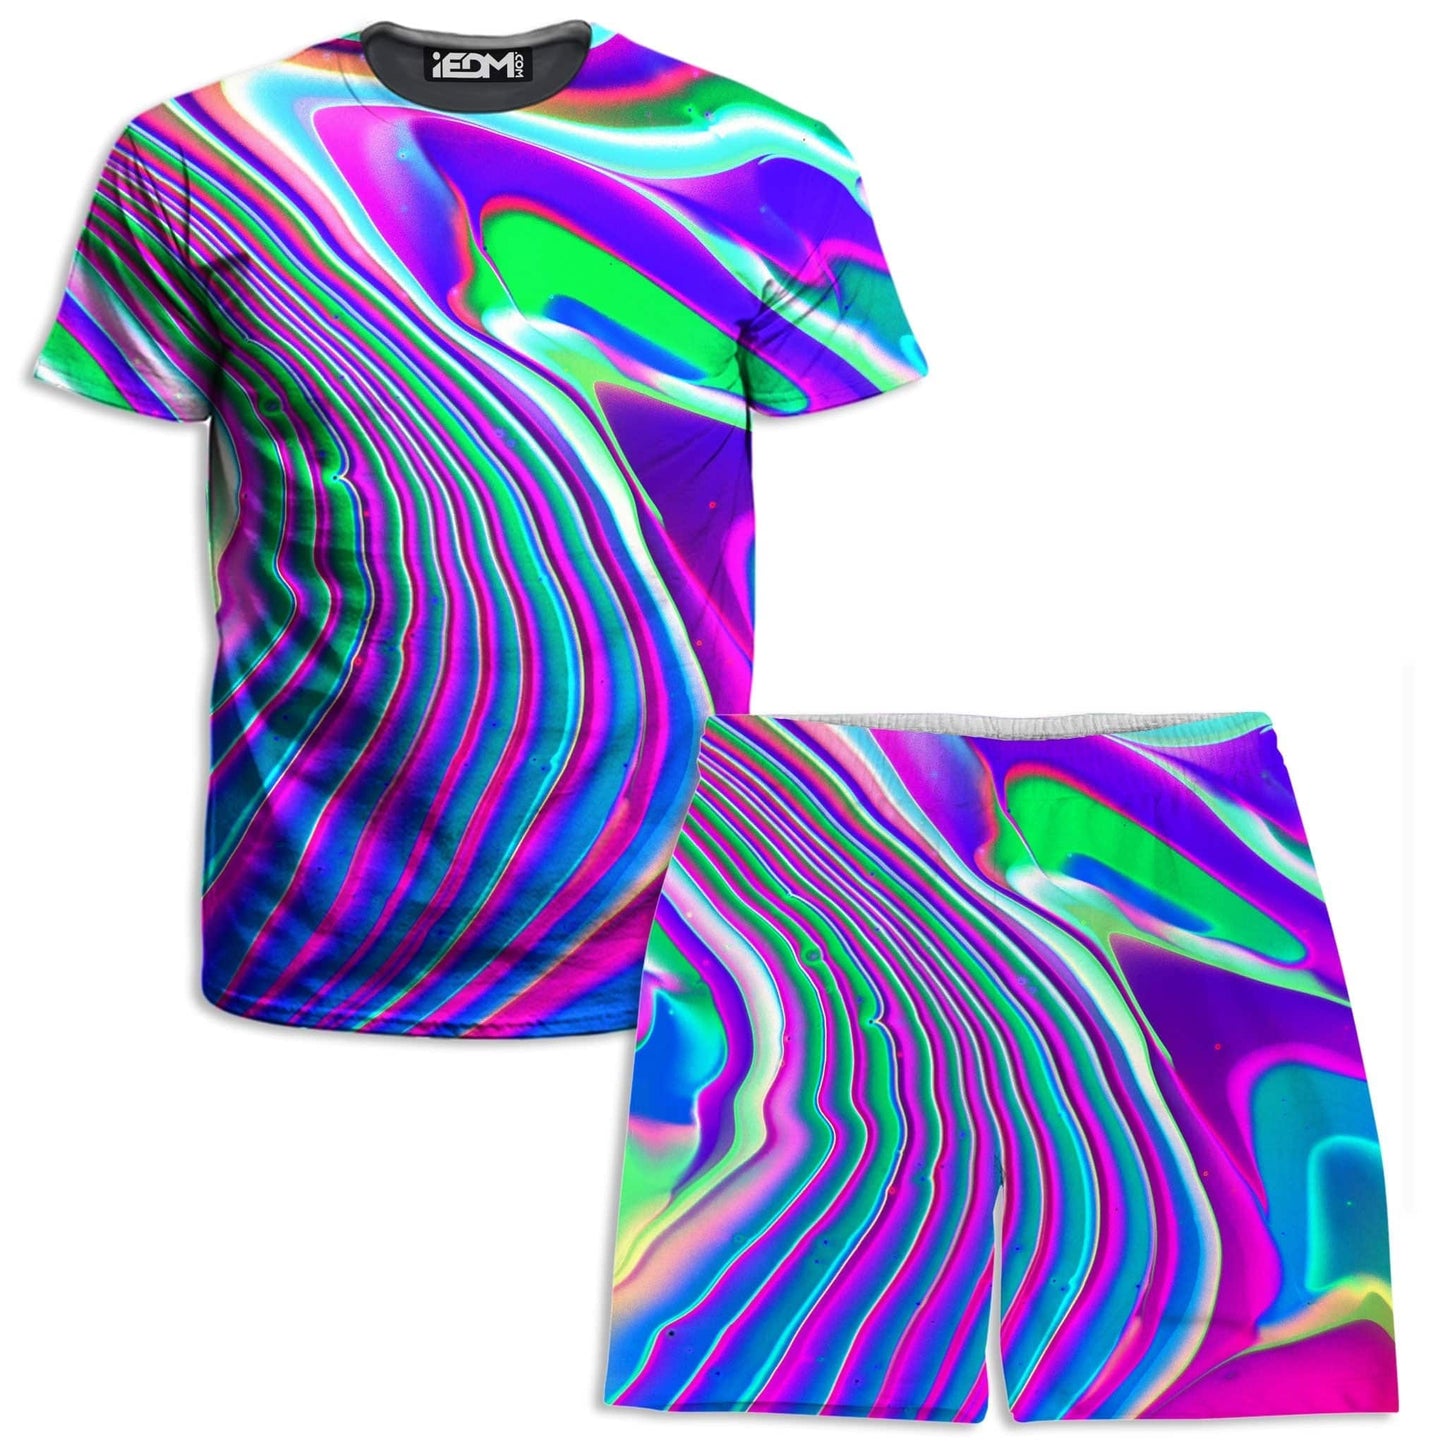 Tangerine Dream T-Shirt and Shorts Combo, Psychedelic Pourhouse, | iEDM